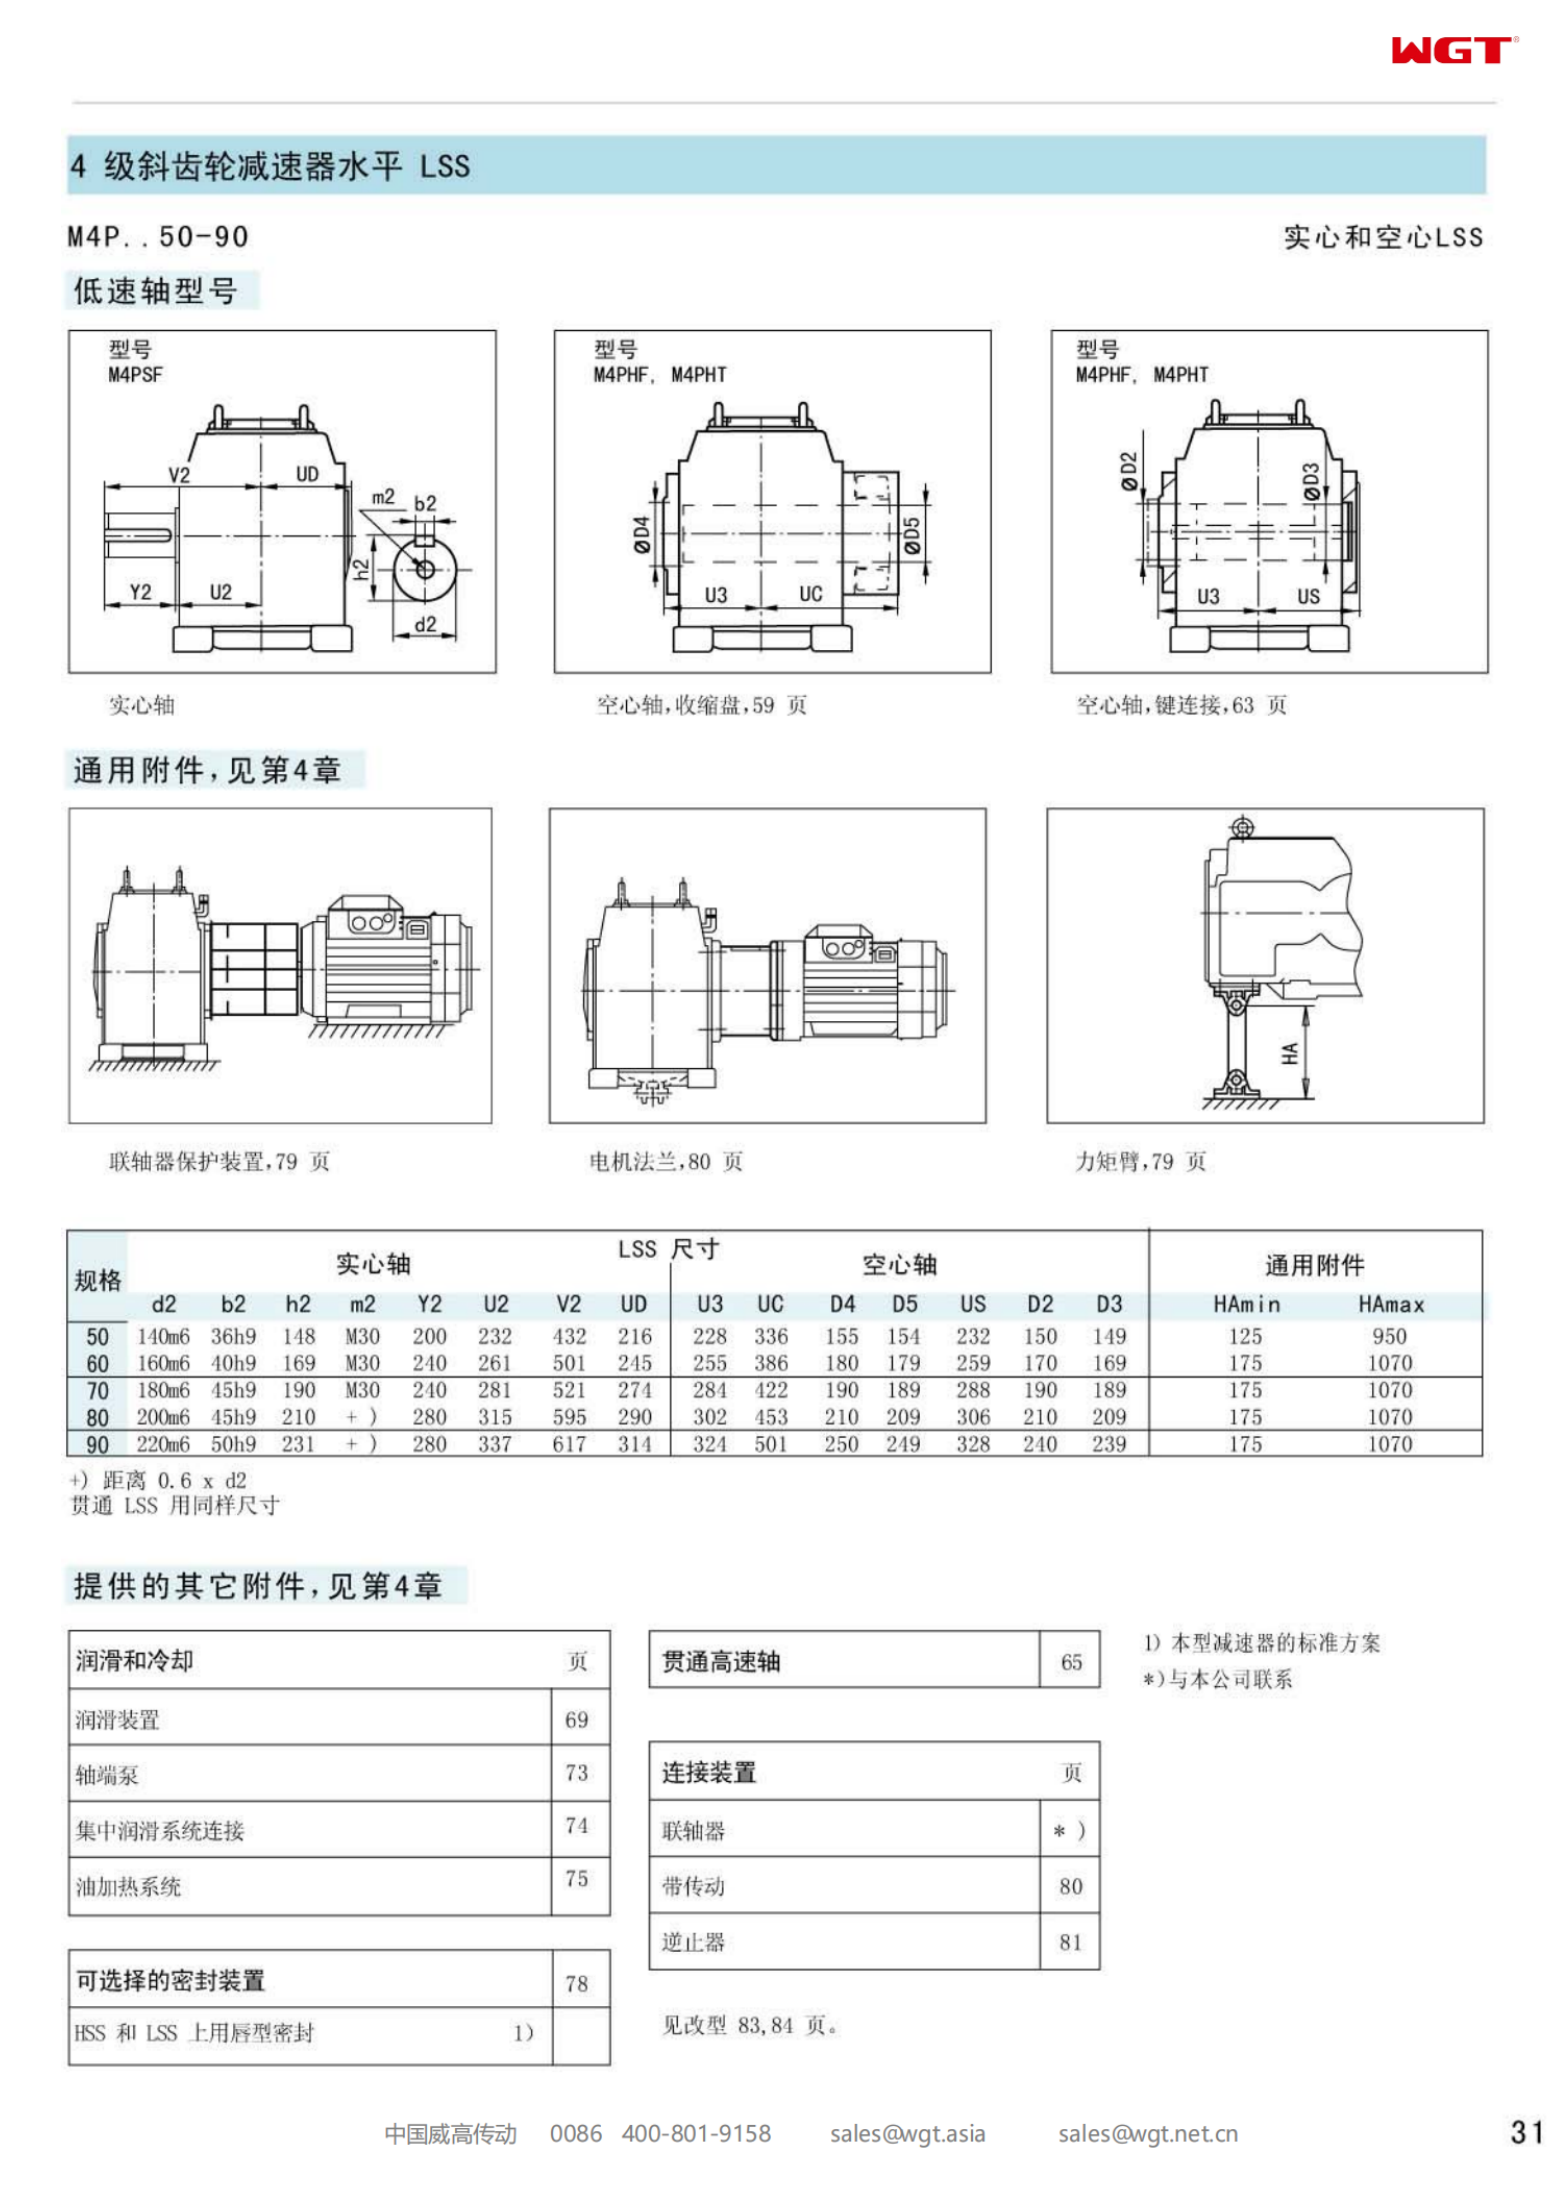 M4PHT80 Replace_SEW_M_Series Gearbox